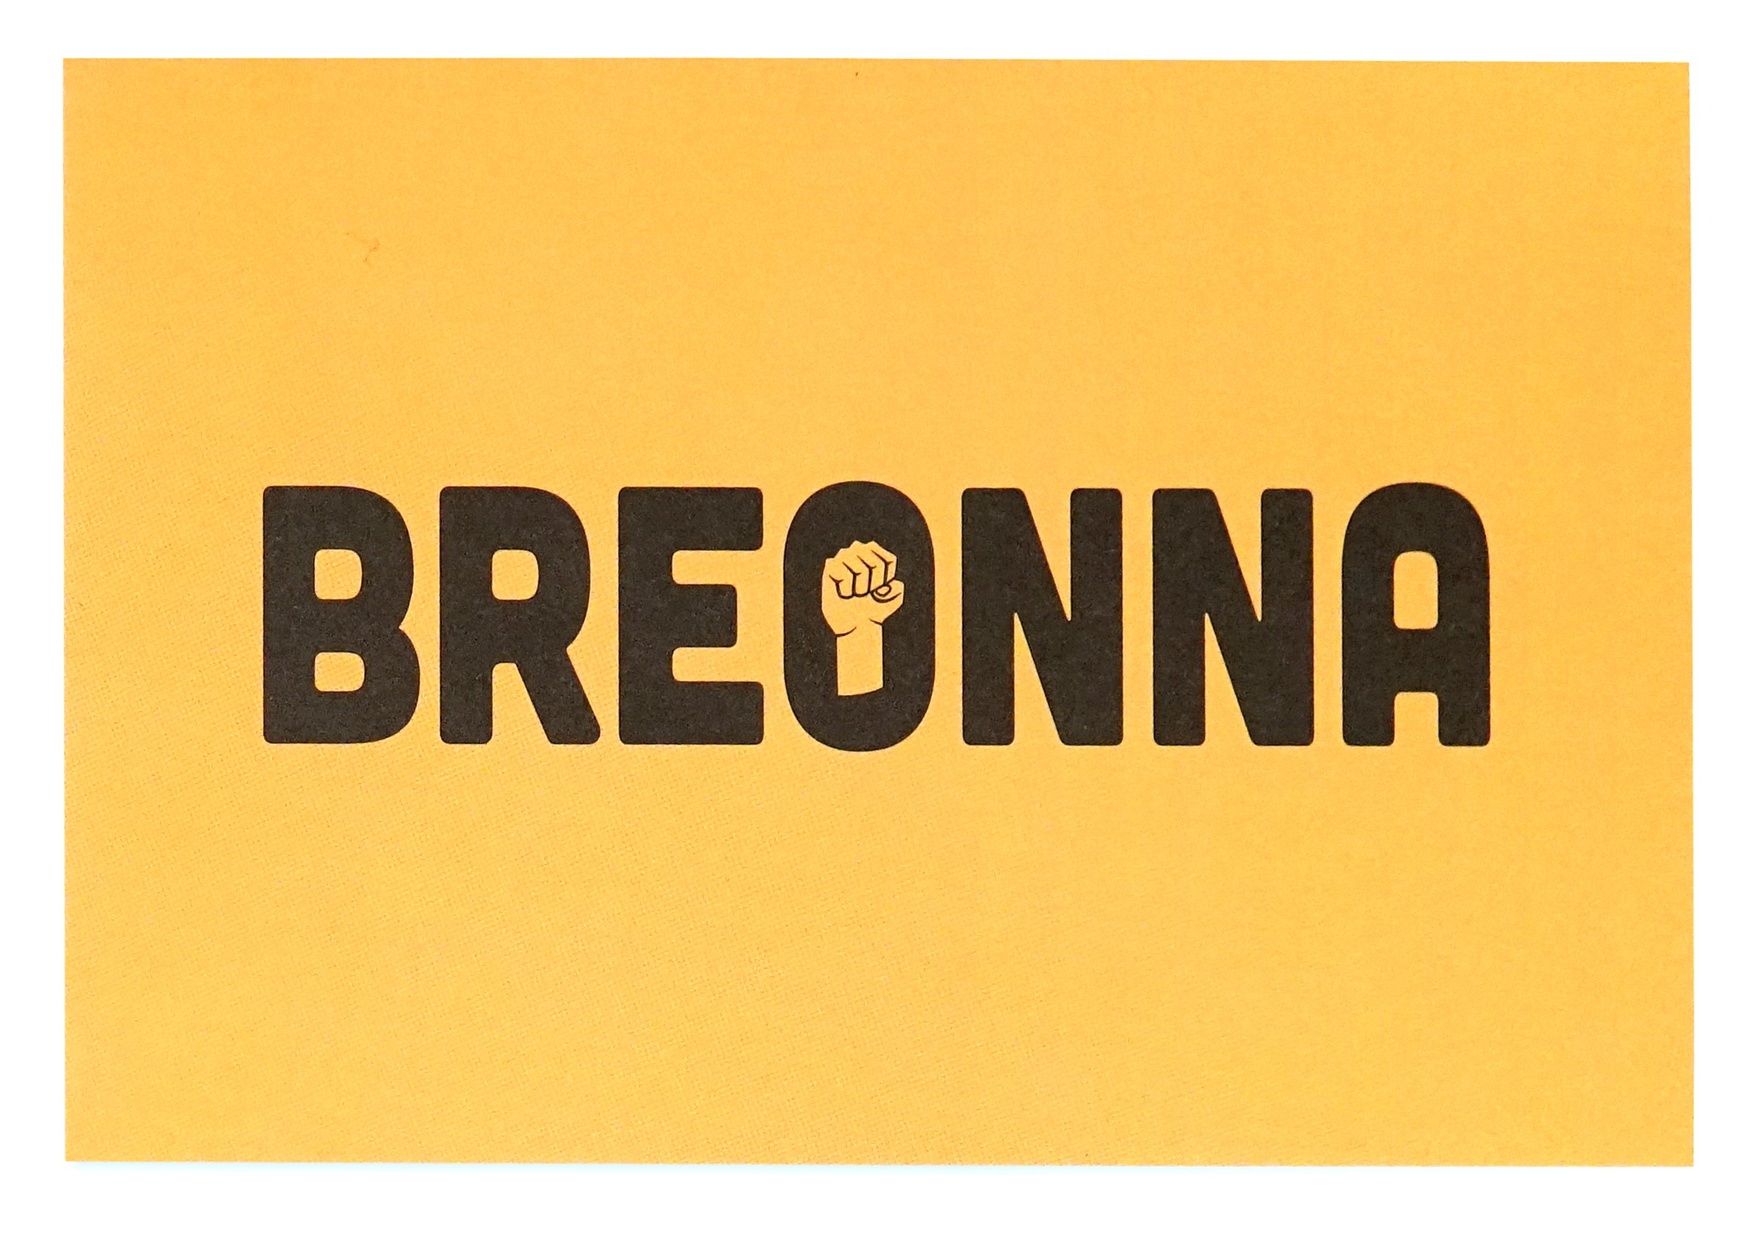 Black text "BREONNA" printed on yellow paper. The center of the "O" is a raised fist.